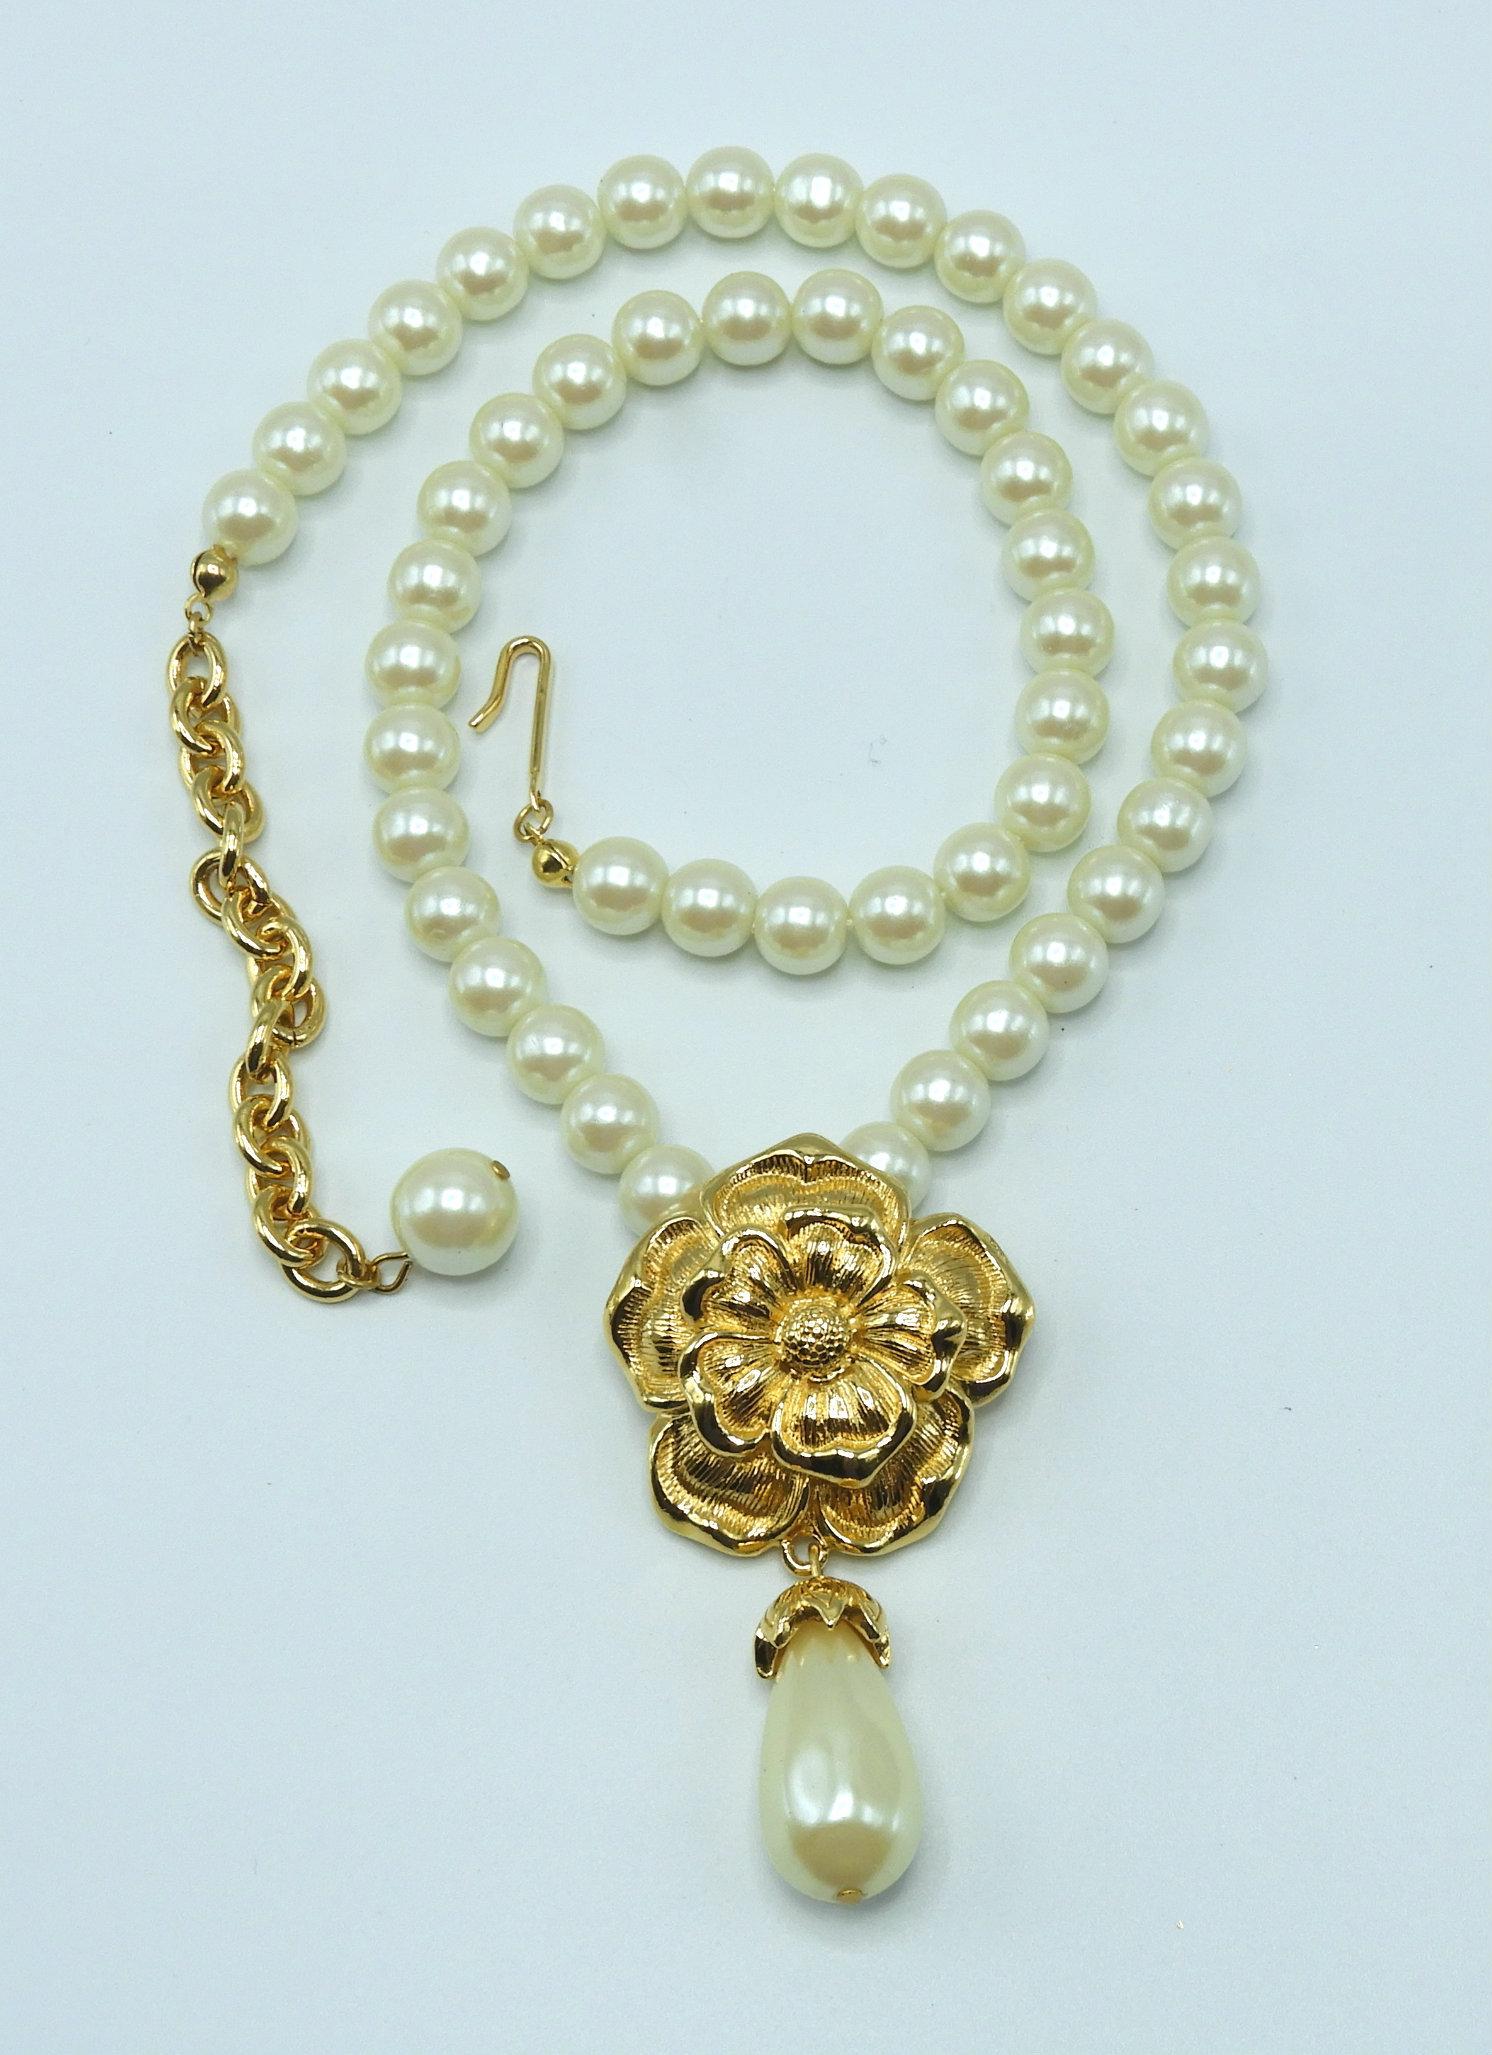 Vintage Avon Pearl Bead Drop Necklace and Earring Set